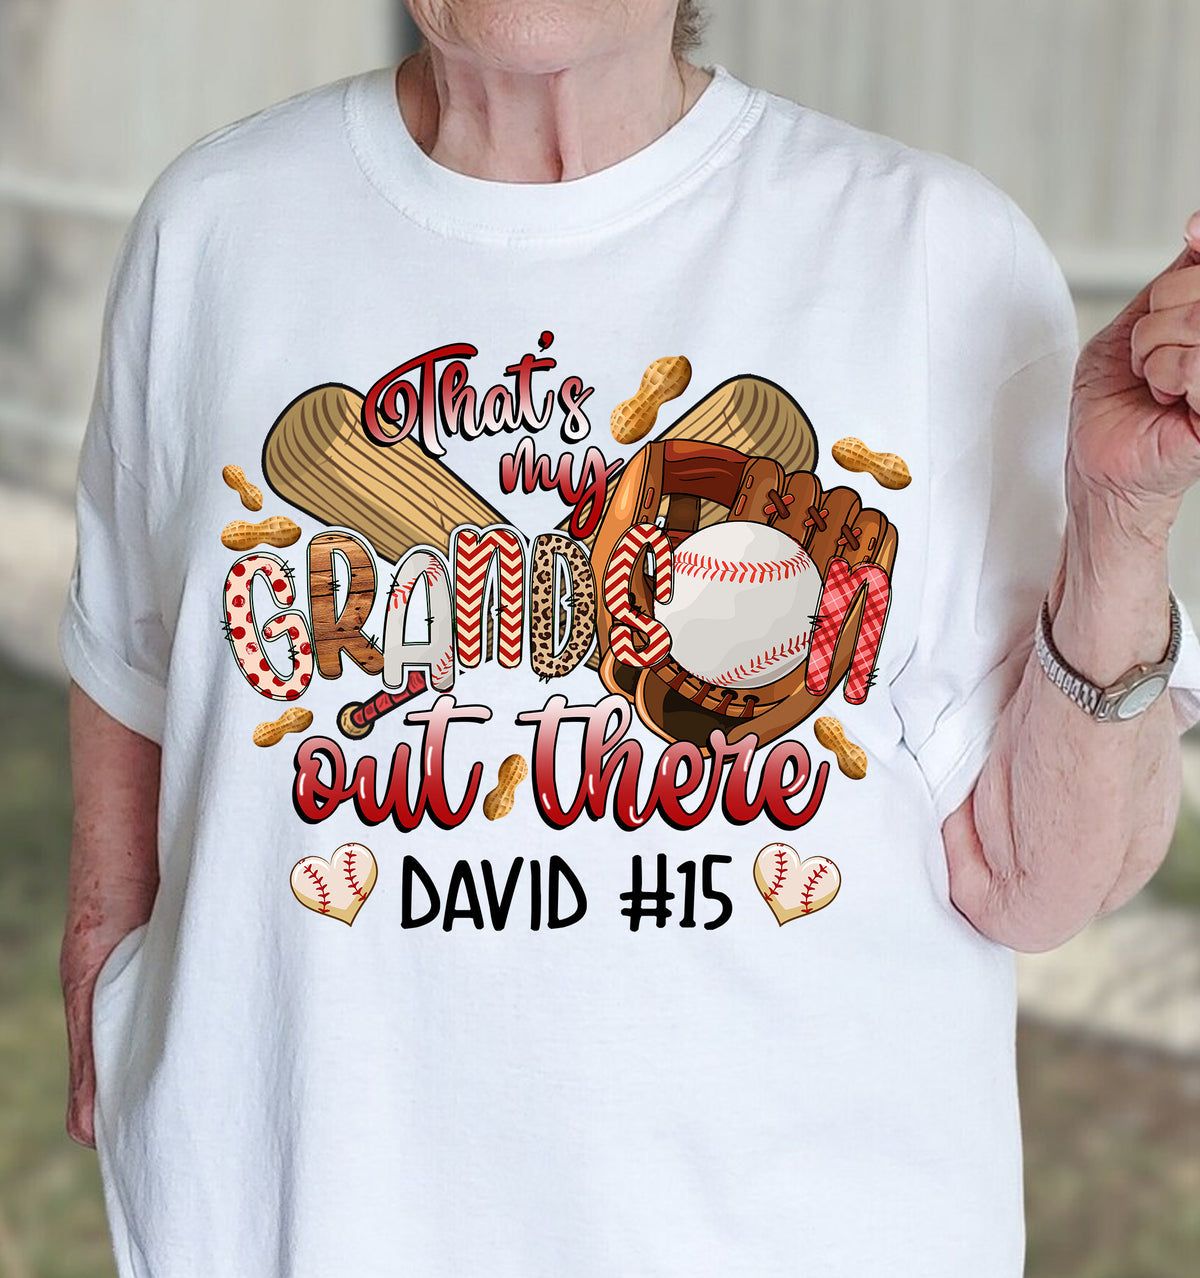 Baseball Grandma Shirt Customized Kid Name And Number That's My Grandson Out There, Perfect Outfit For Grandma, Nana, Granny, GiGi